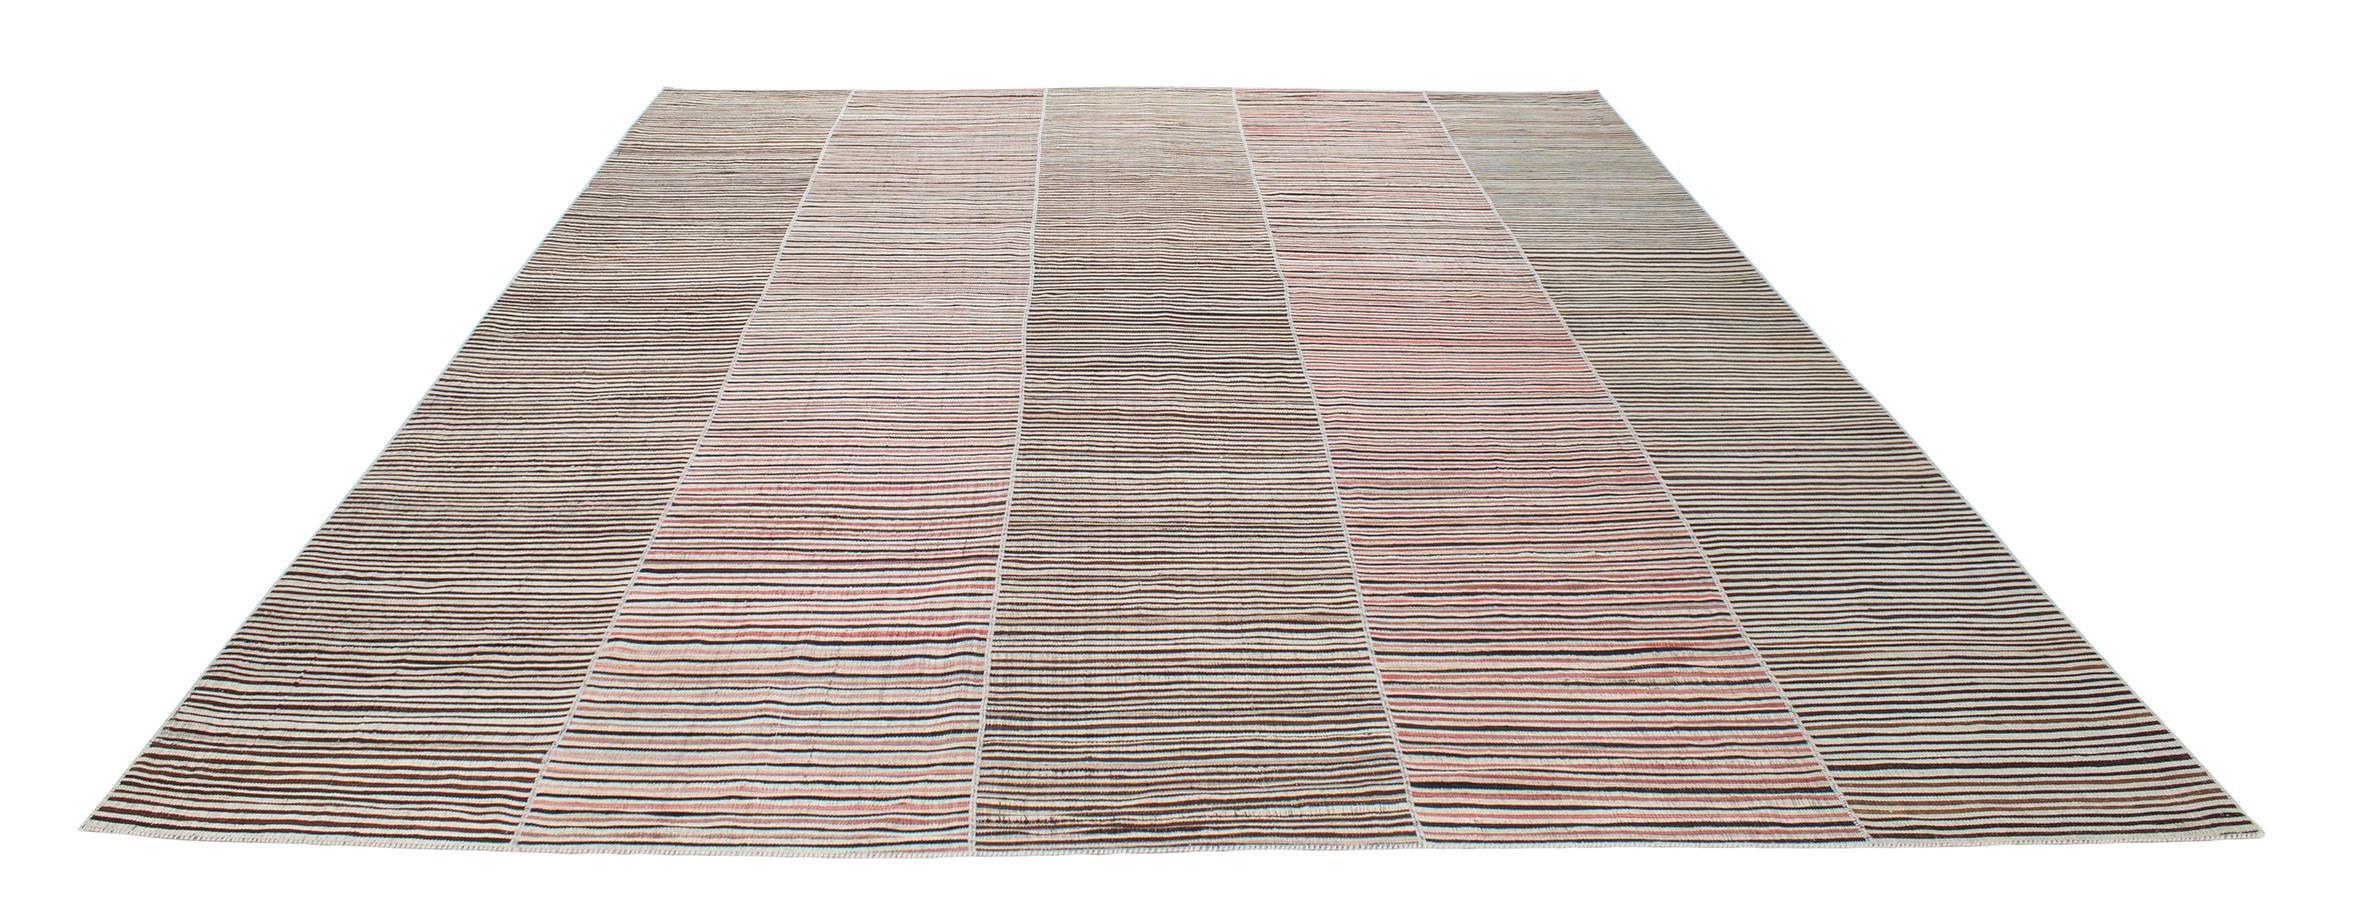 Vintage Persian Mazandaran Handwoven Flat-Weave Rug in Brown and Red Stripes In Good Condition For Sale In New York, NY